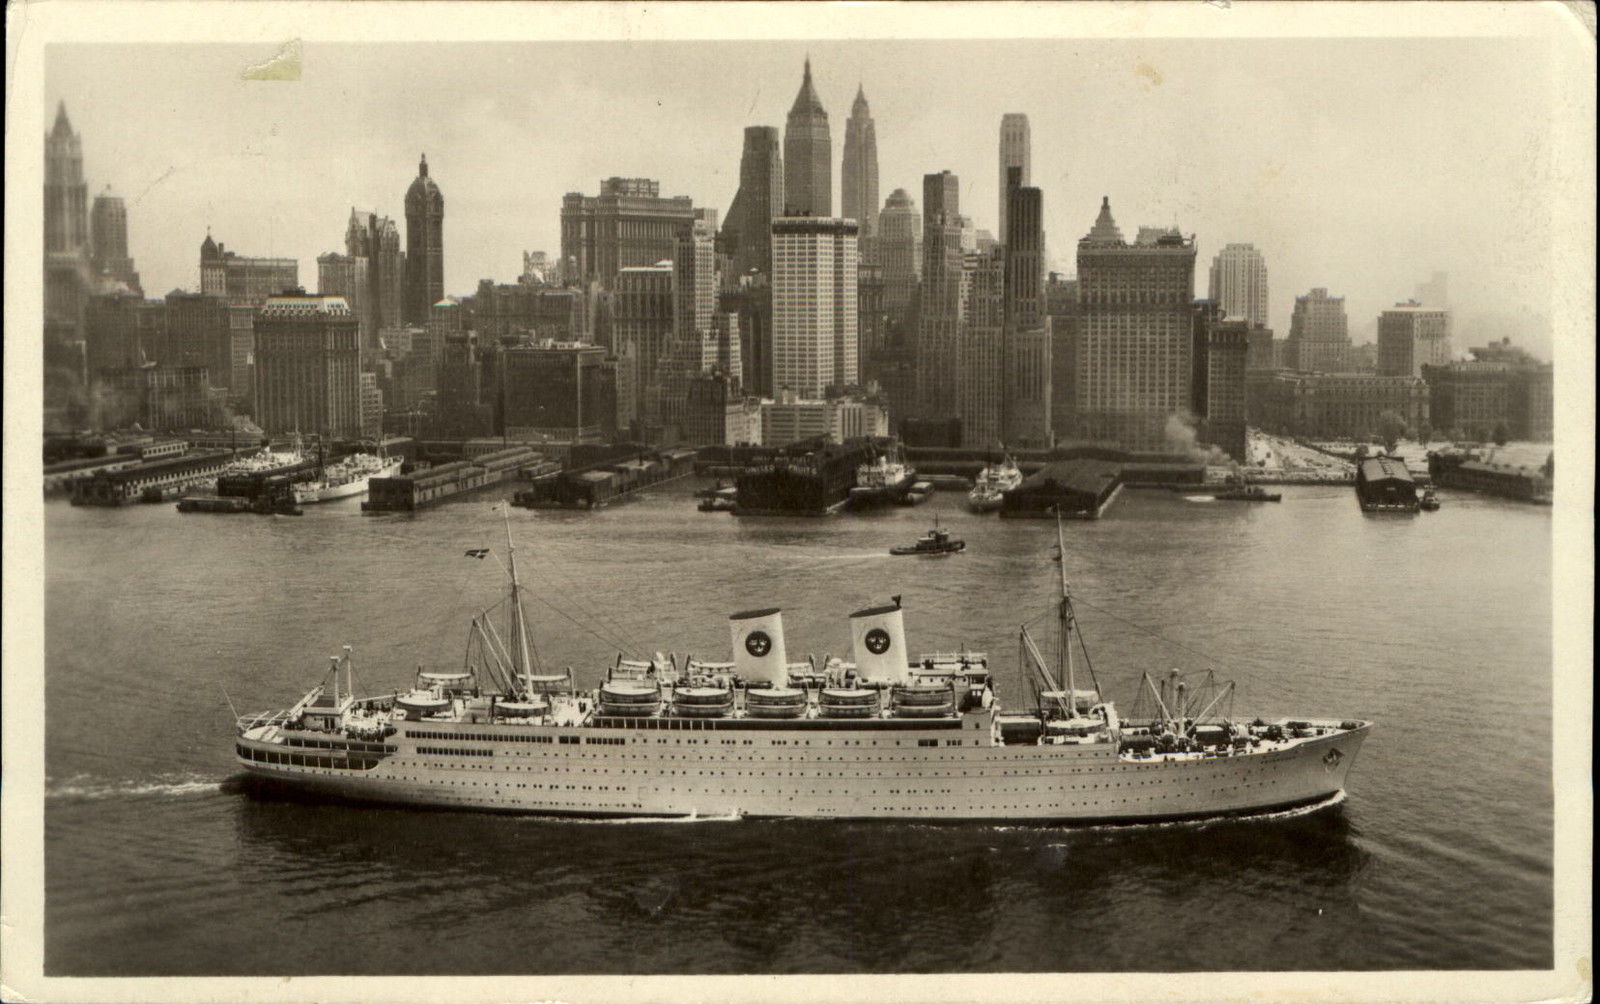 MS Gripsholm 1951 mailed